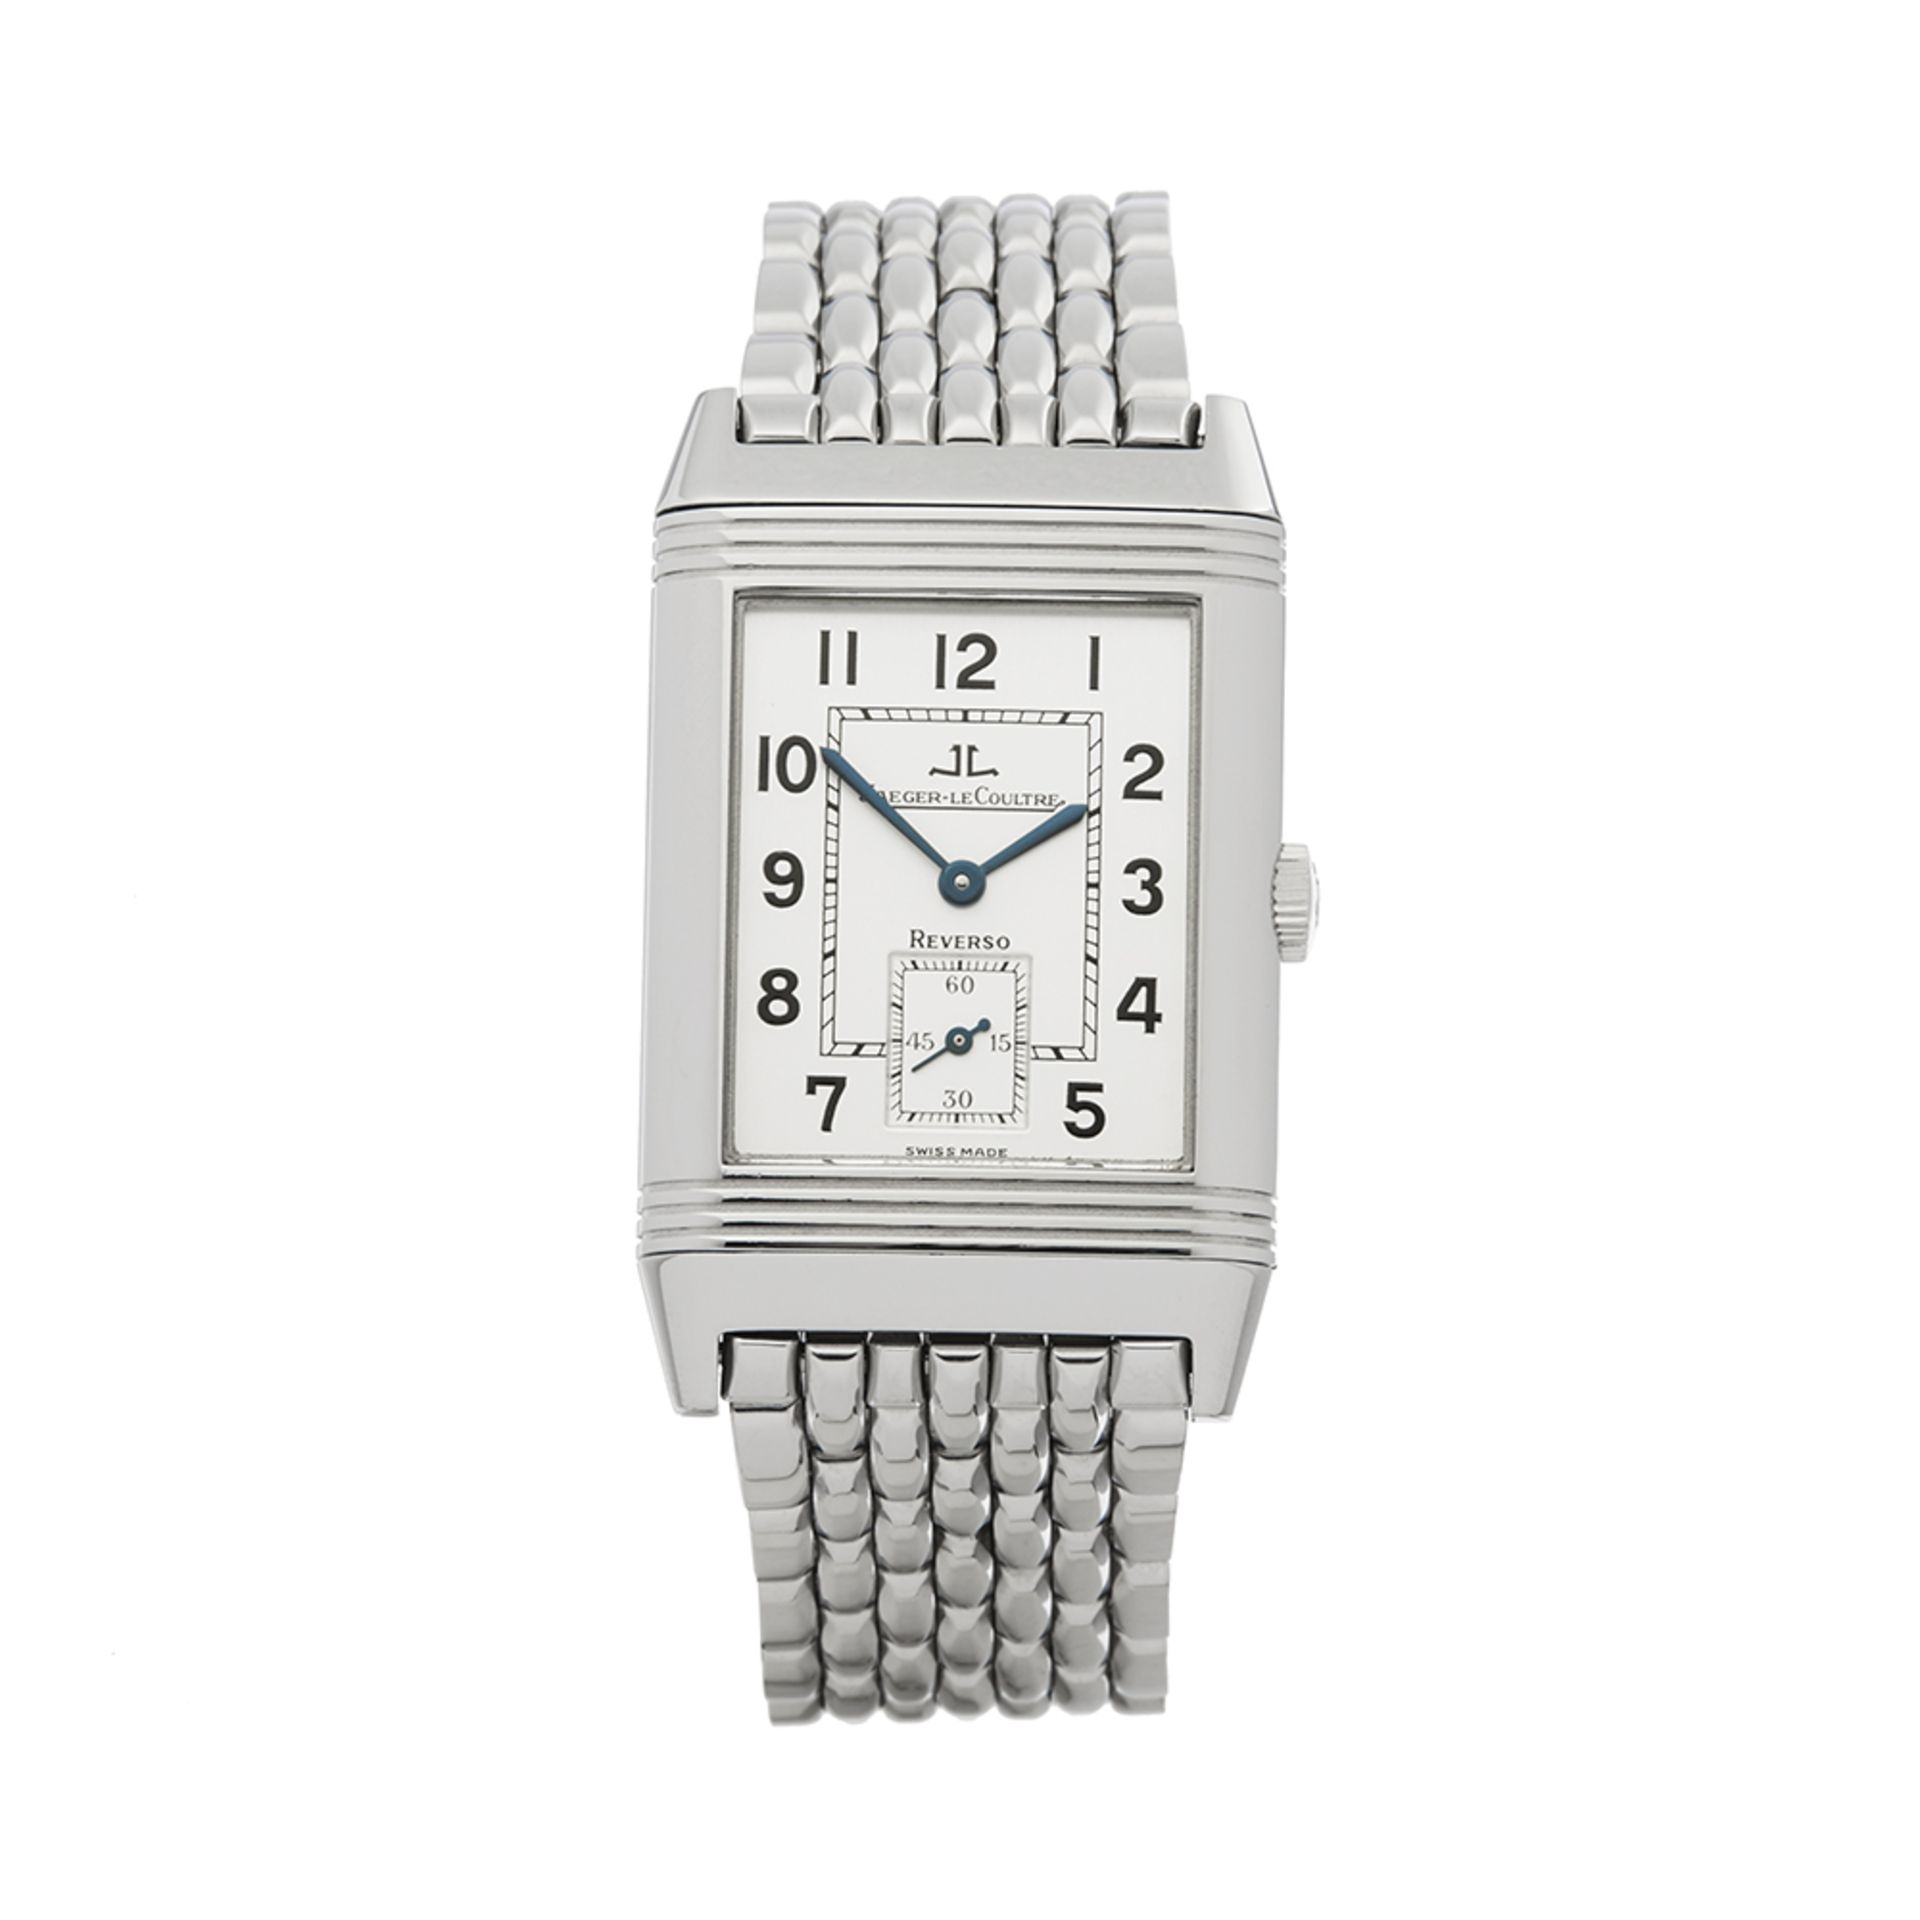 Jaeger-LeCoultre Reverso Stainless Steel - 270.8.62 - Image 2 of 8